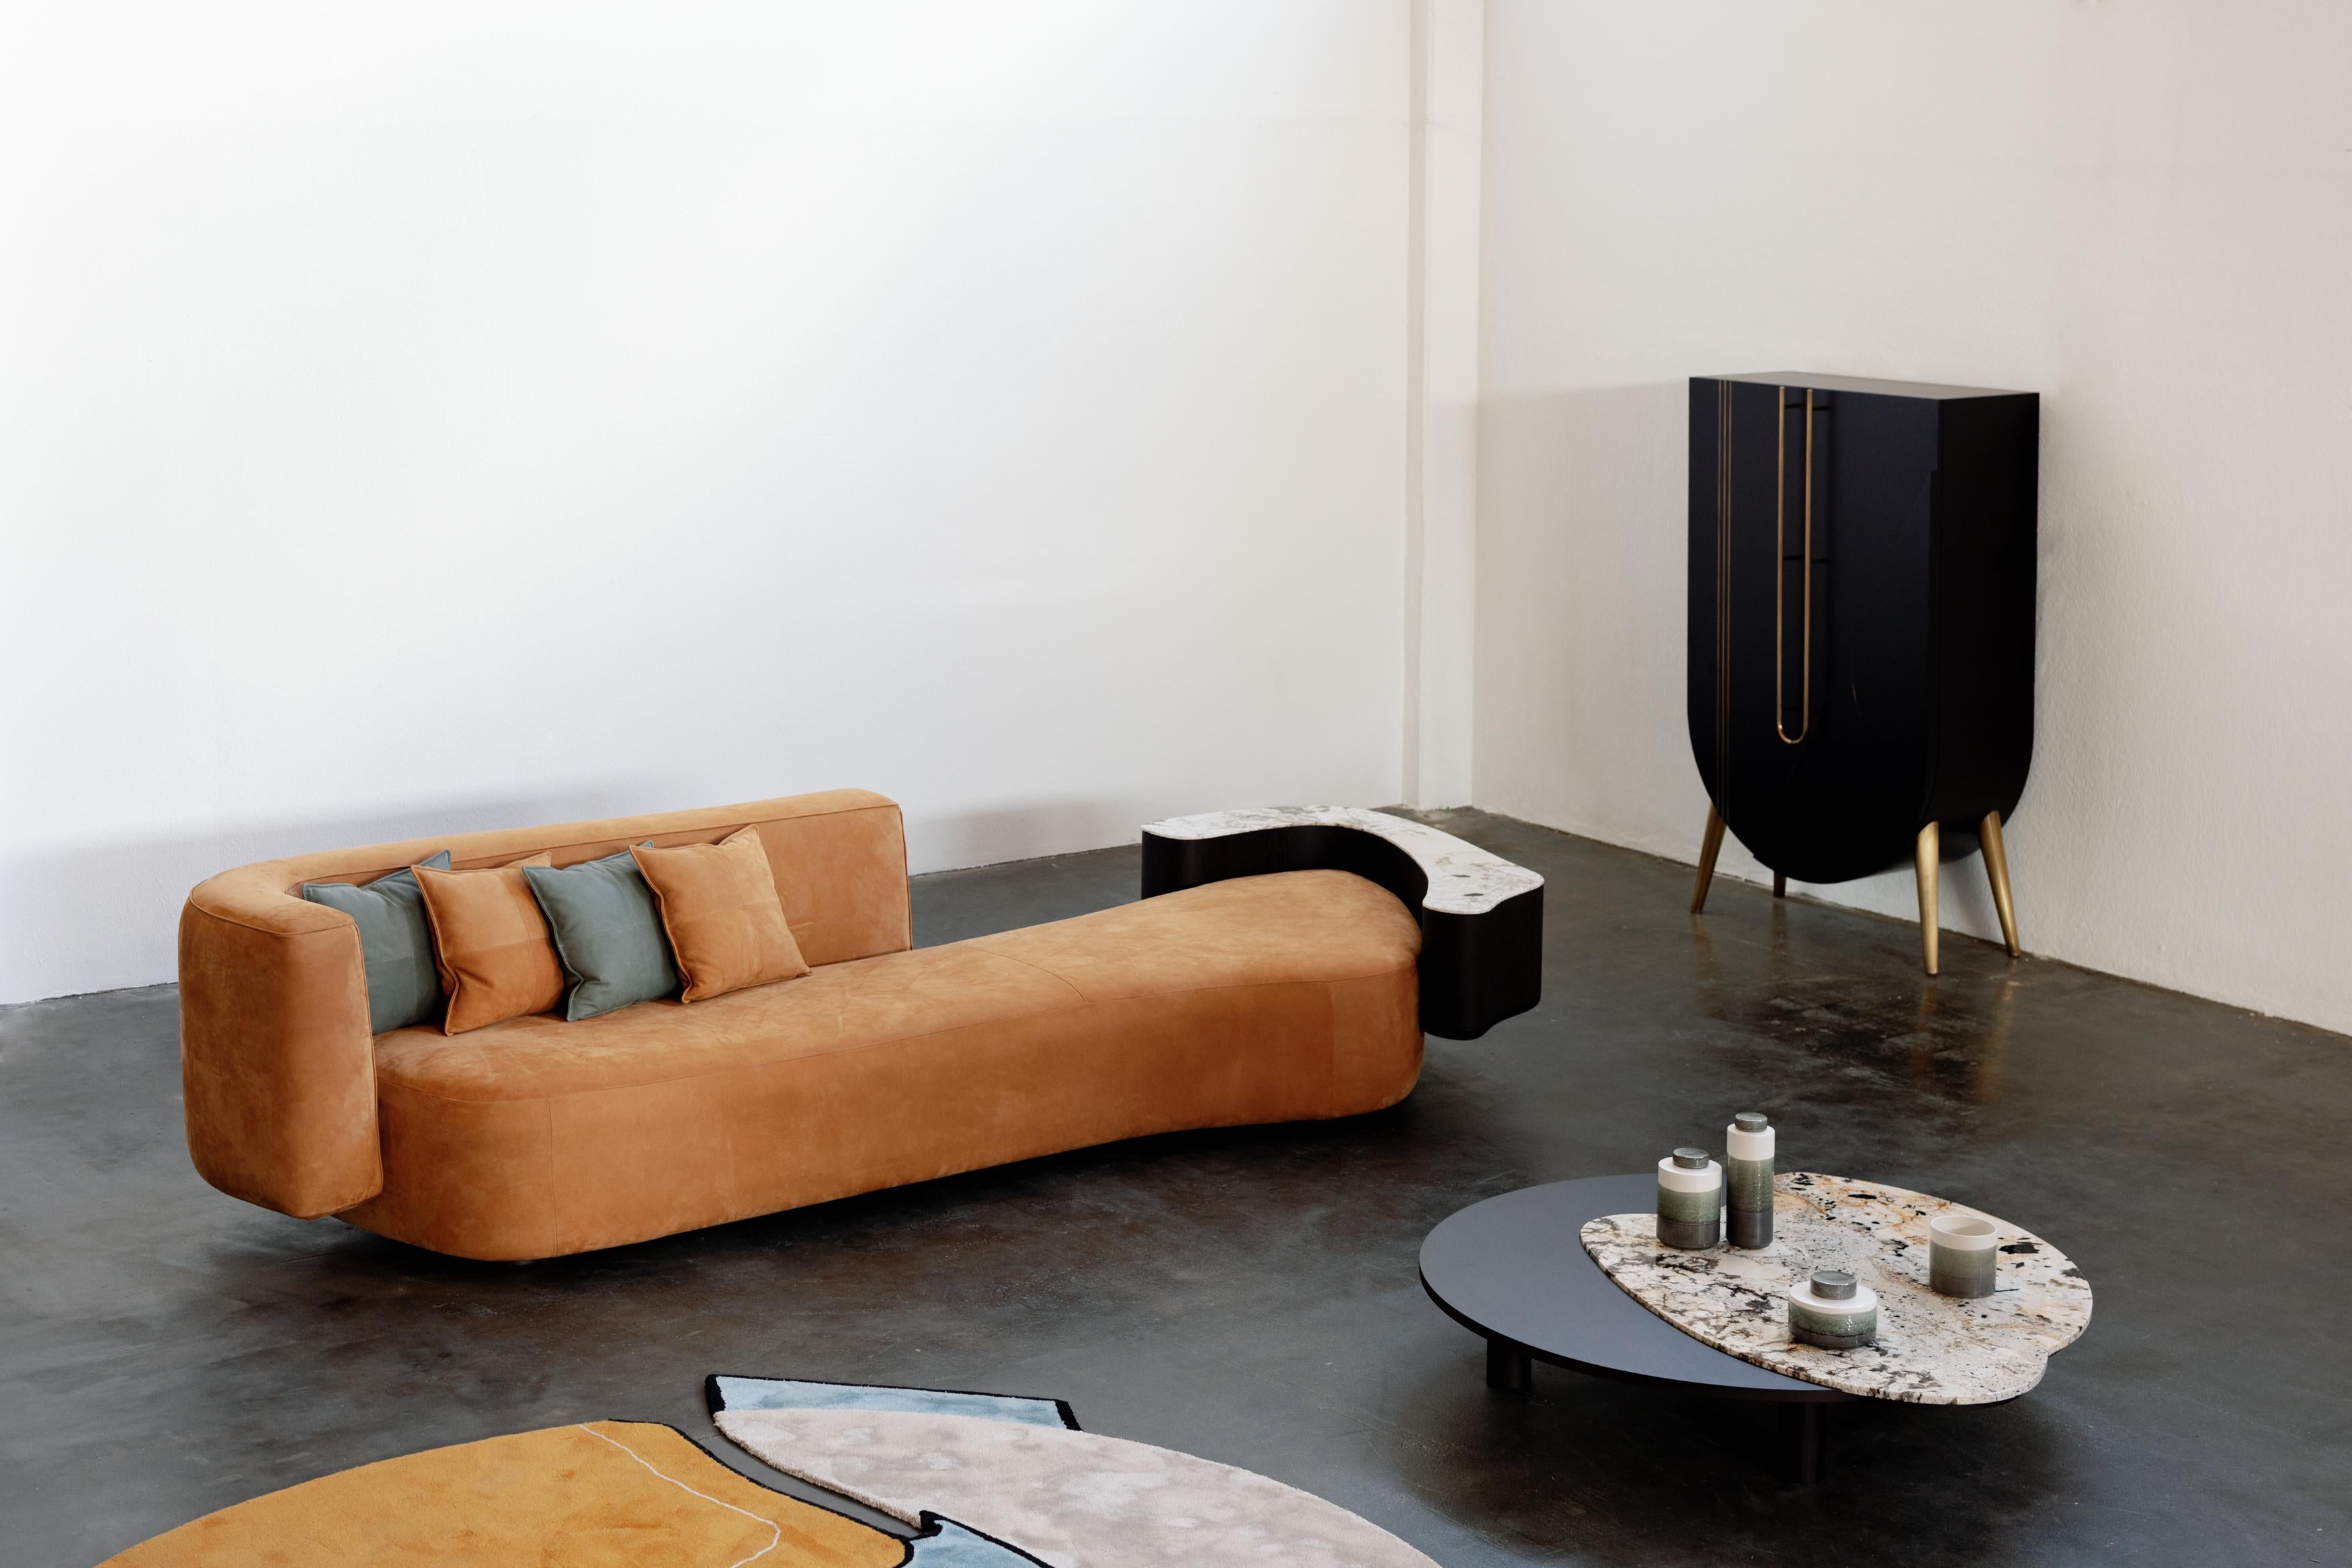 Portuguese Modern Galapinhos Sofa, Caramel Leather, Handmade in Portugal by Greenapple For Sale